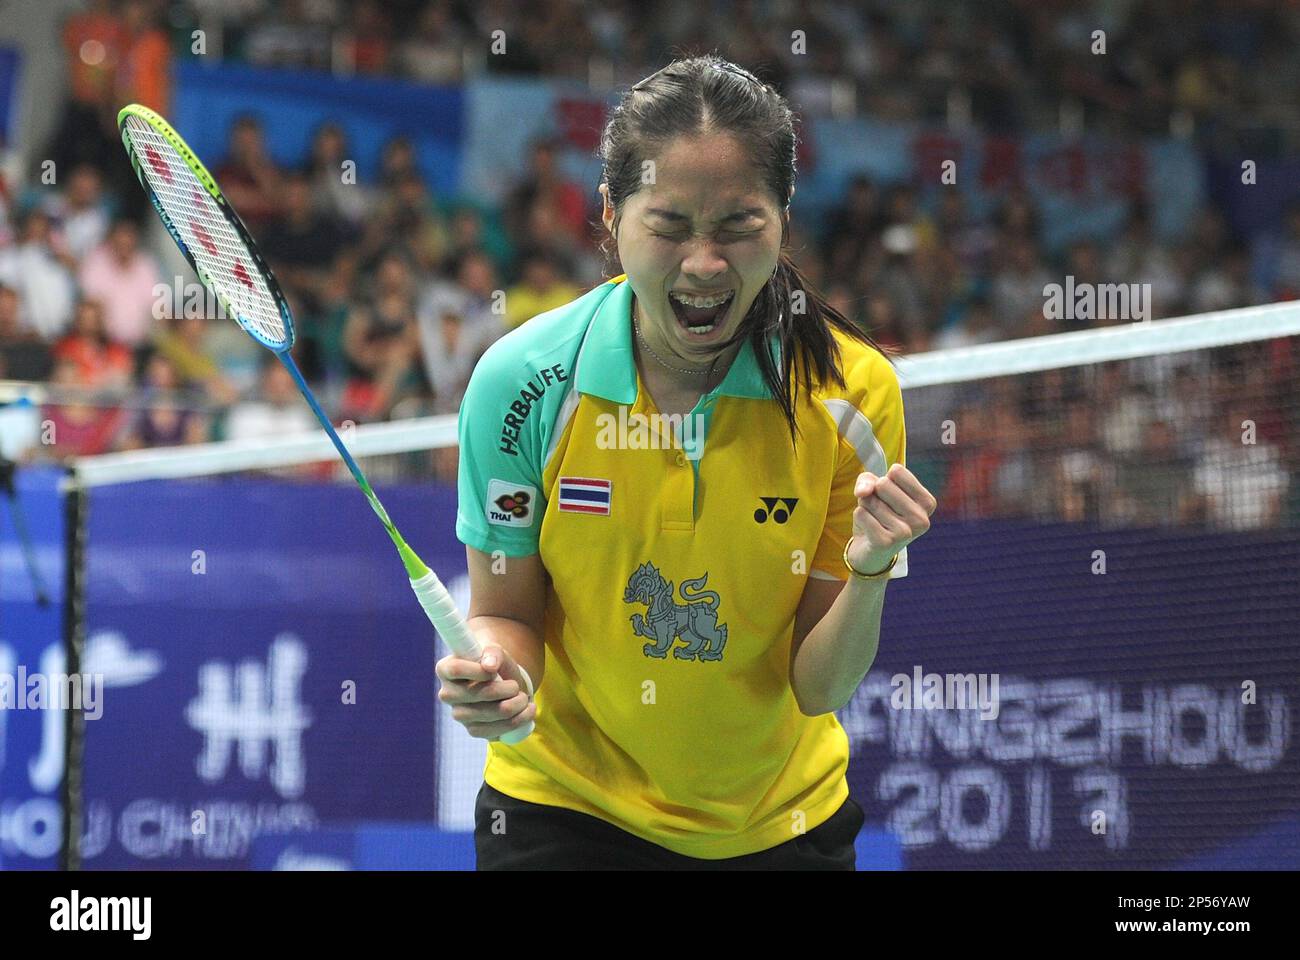 Ratchanok Intanon of Thailand celebrates after winning the womens singles final against Li Xuerui of China at the 2013 BWF Badminton World Championships in Guangzhou in south Chinas Guangdong province on Sunday,